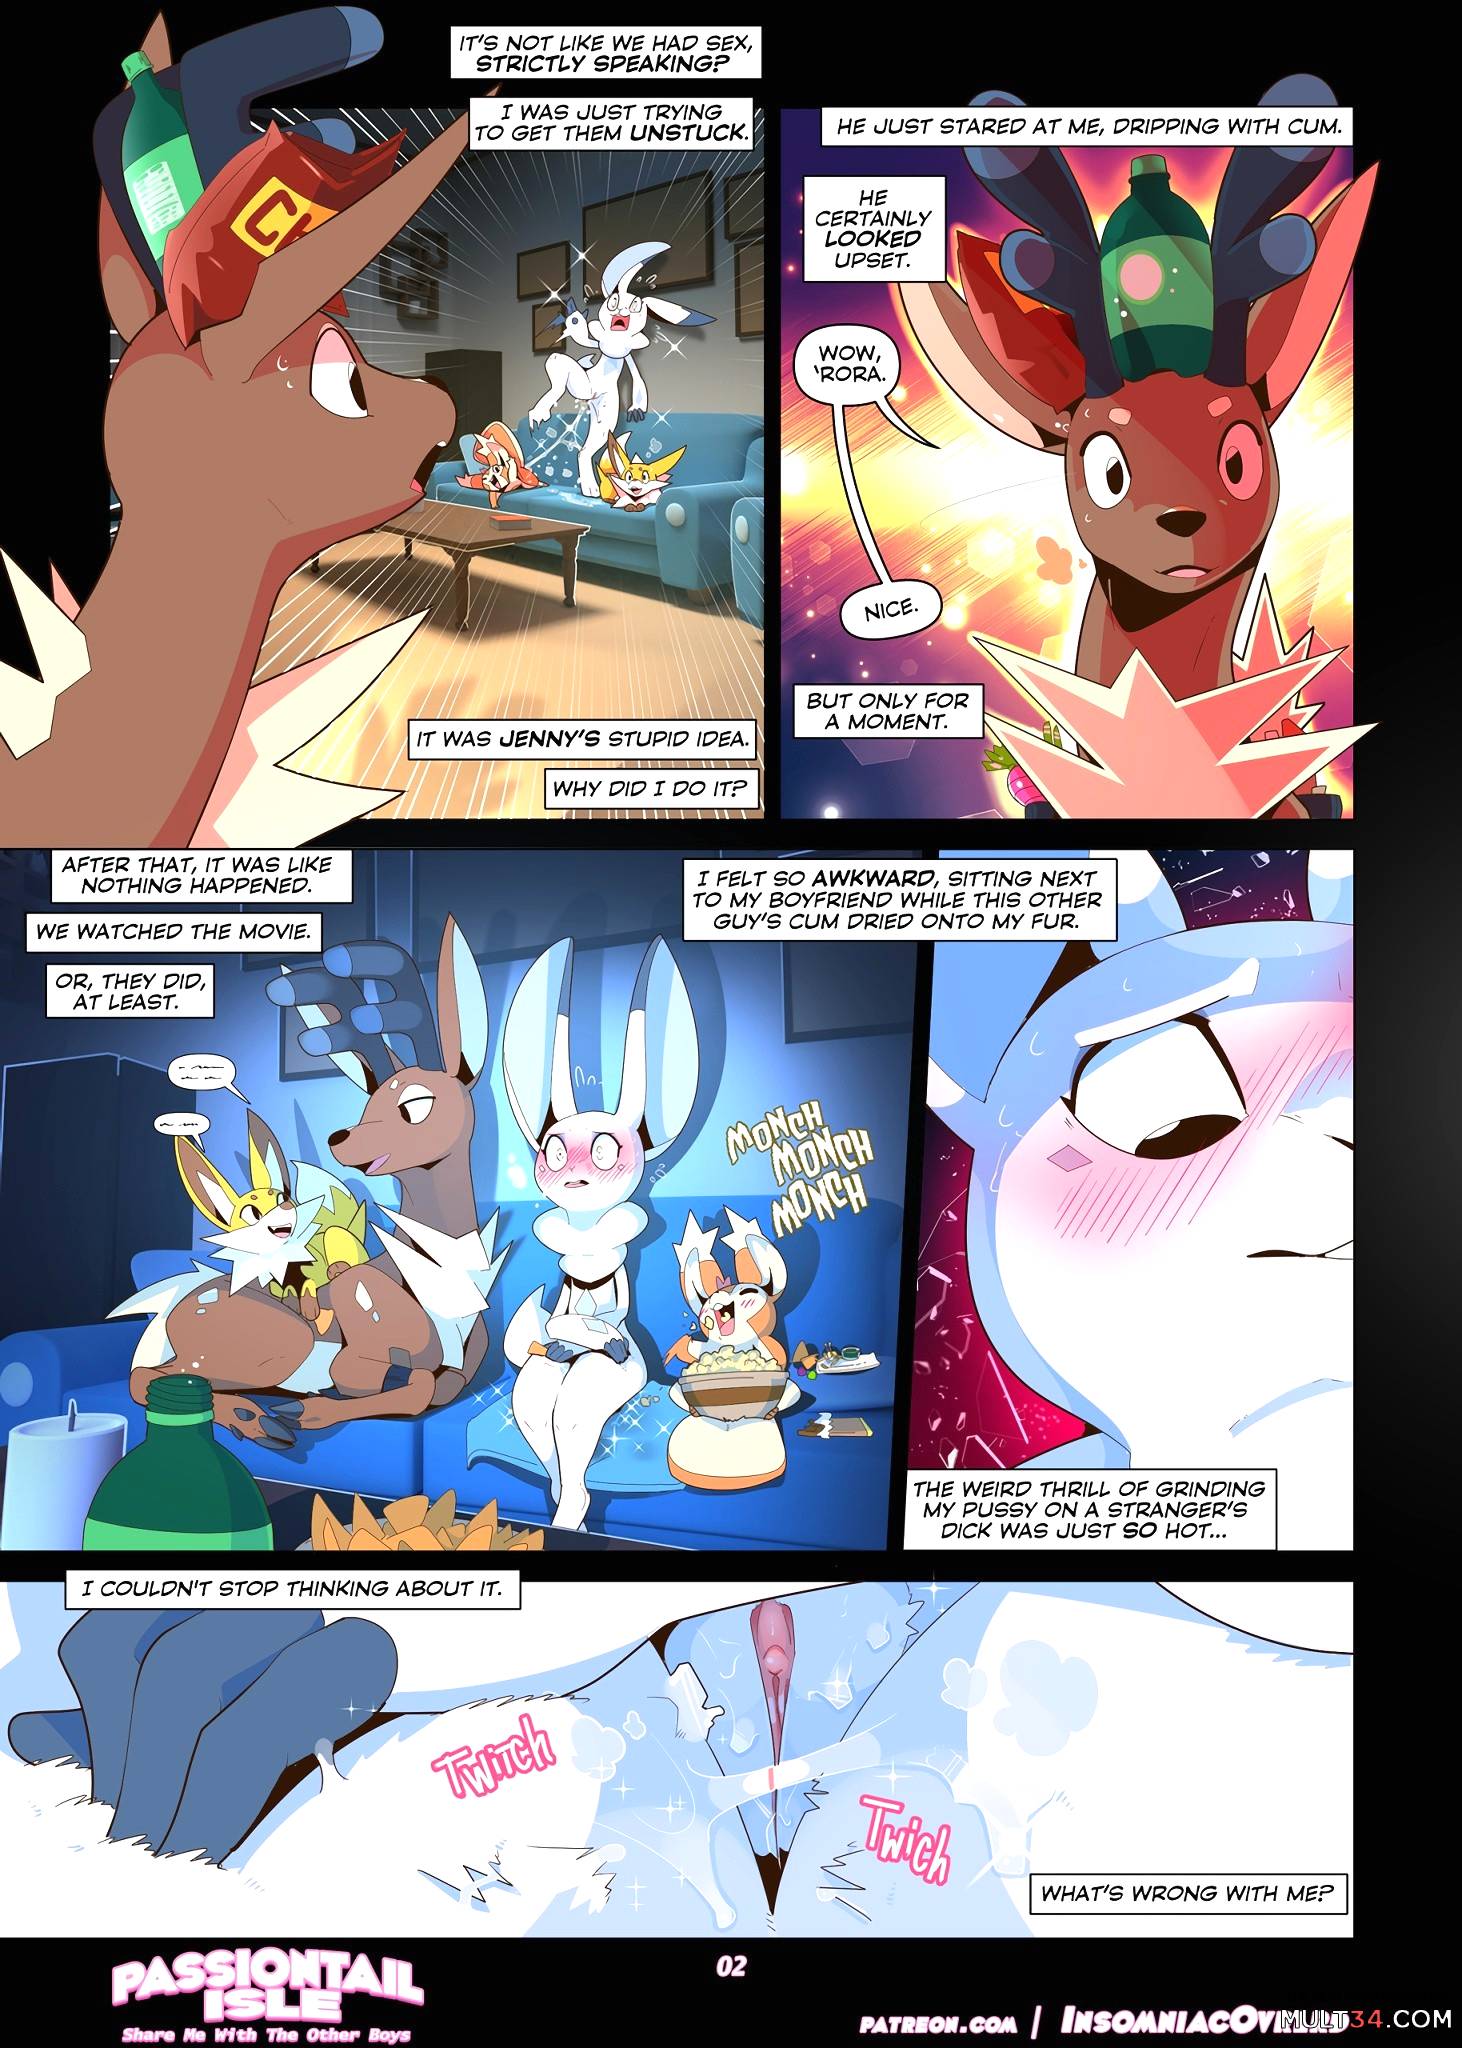 Passiontail Isle: Share Me With The Other Boys page 3